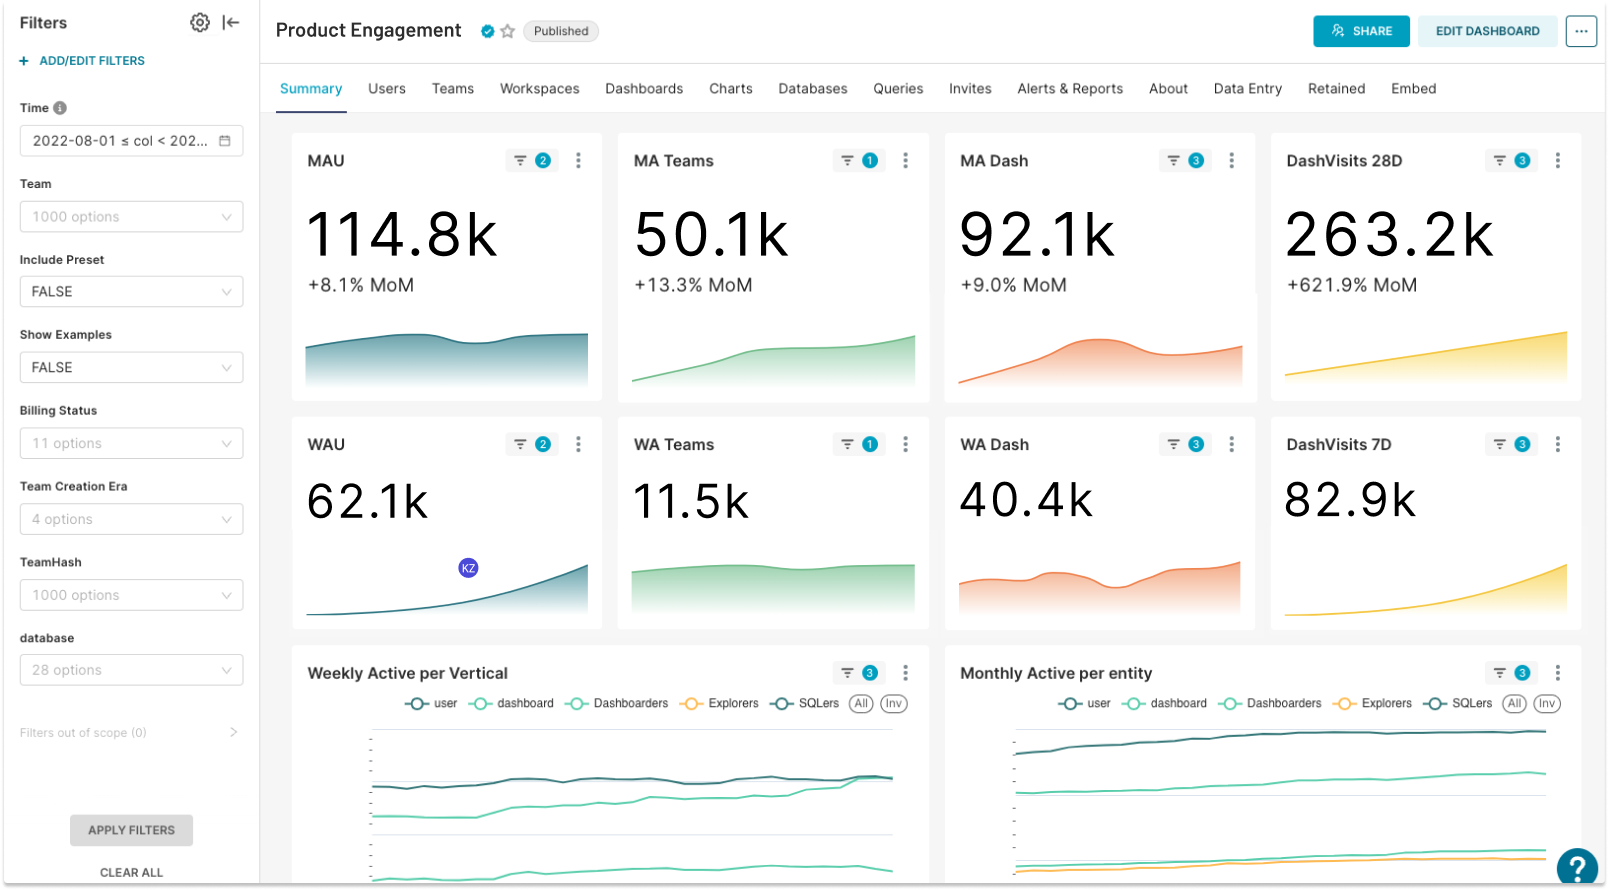 Product Engagement Dashboard